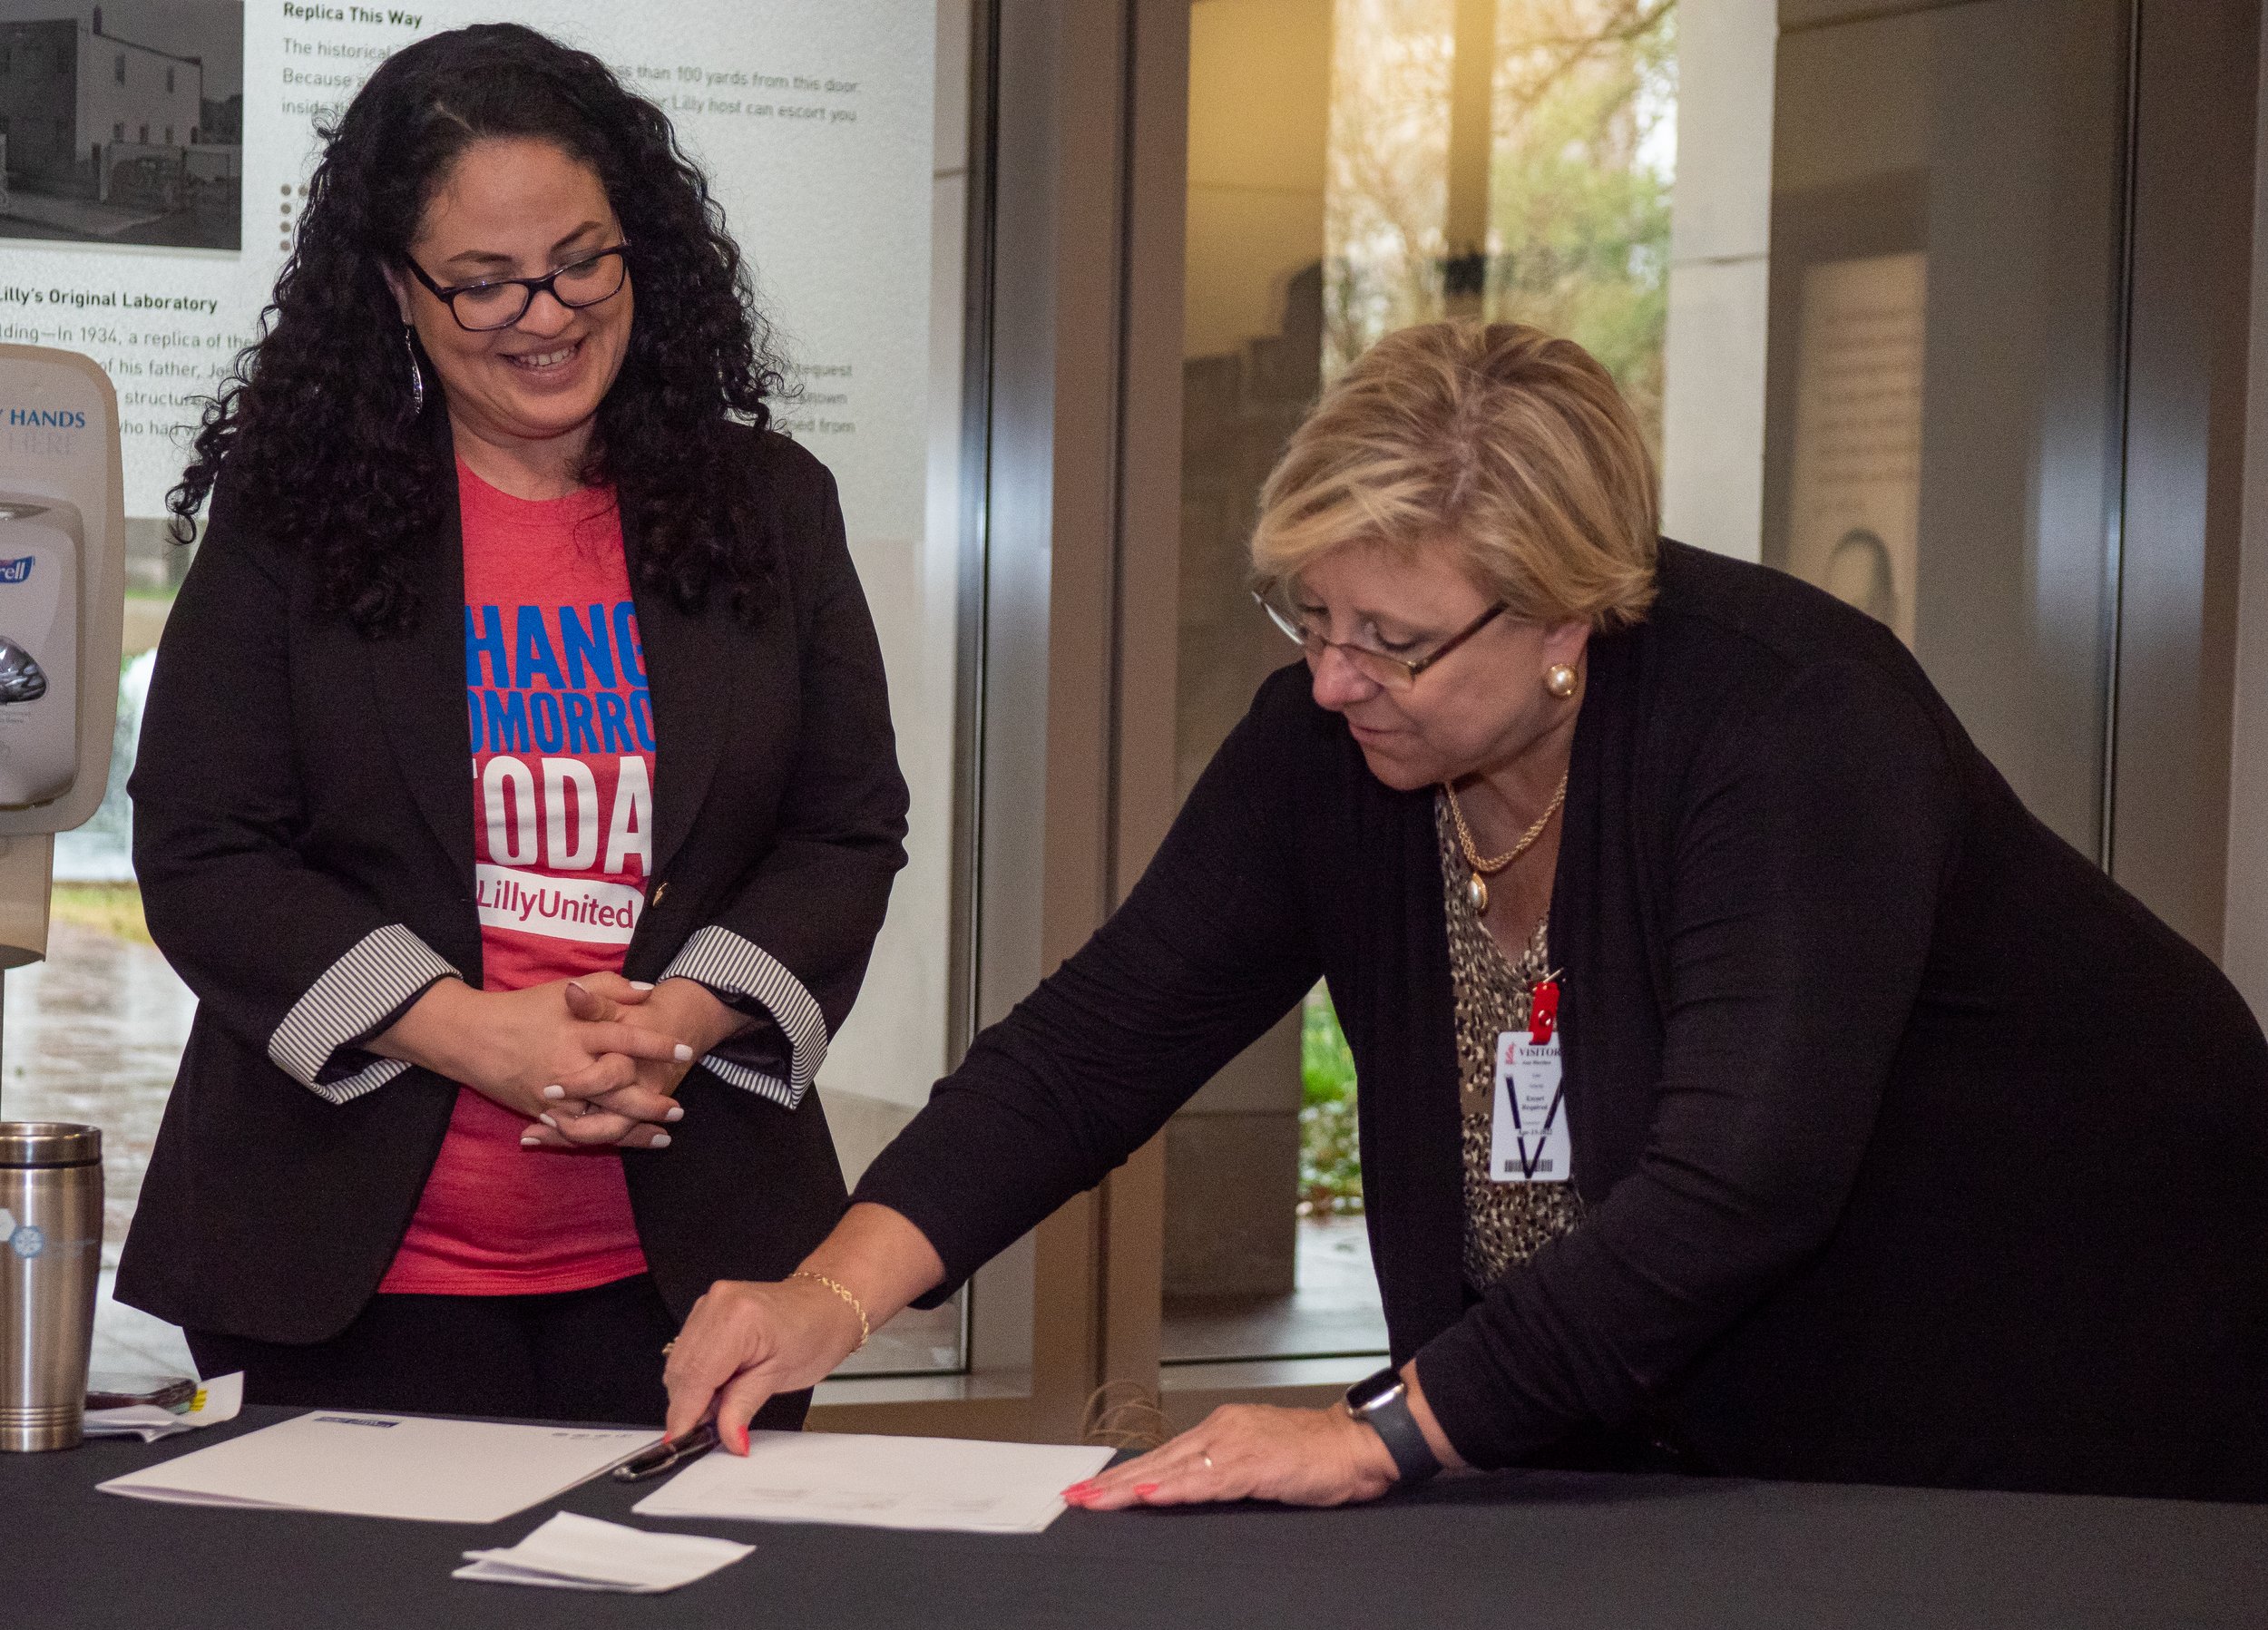  Cynthia Cardona (left), president of the Lilly Foundation and associate vice president of Social Impact at Eli Lilly and Company, and Ann Murtlow, former president and CEO of United Way of Central Indiana, sign a memorandum of understanding April 13